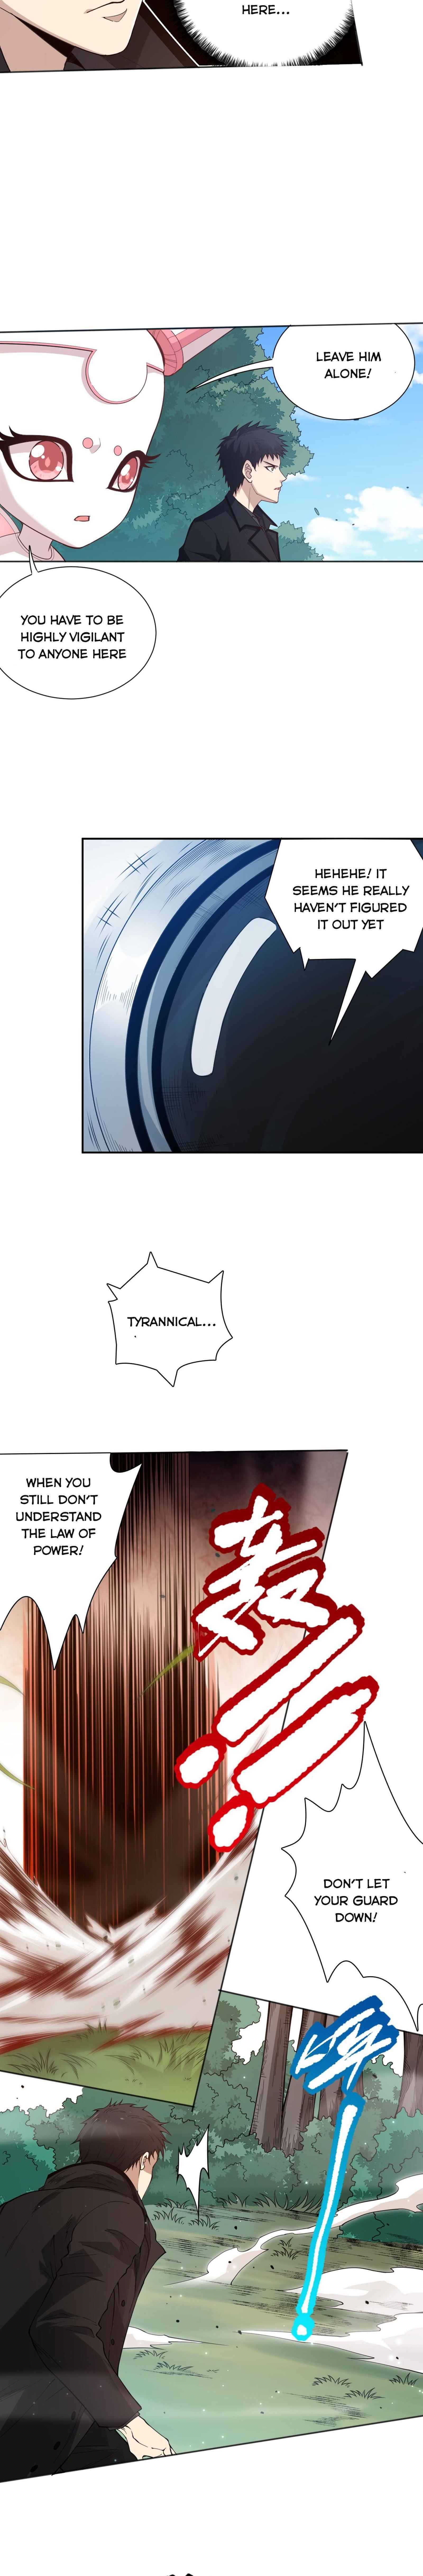 Ultimate Soldier - Page 2